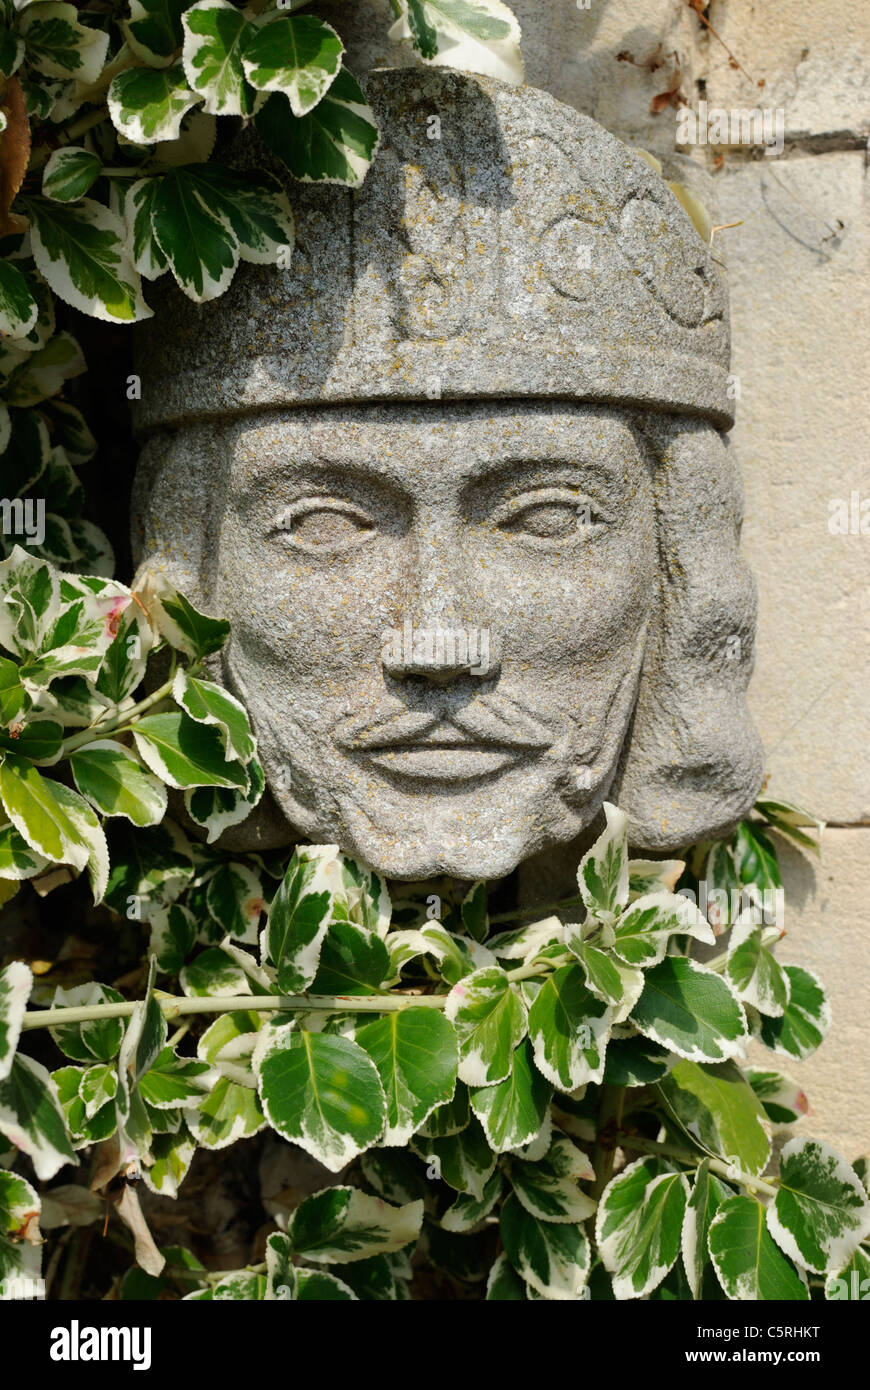 A carved stone face of a king or nobleman, on a wall in sunlight with ivy. Stock Photo